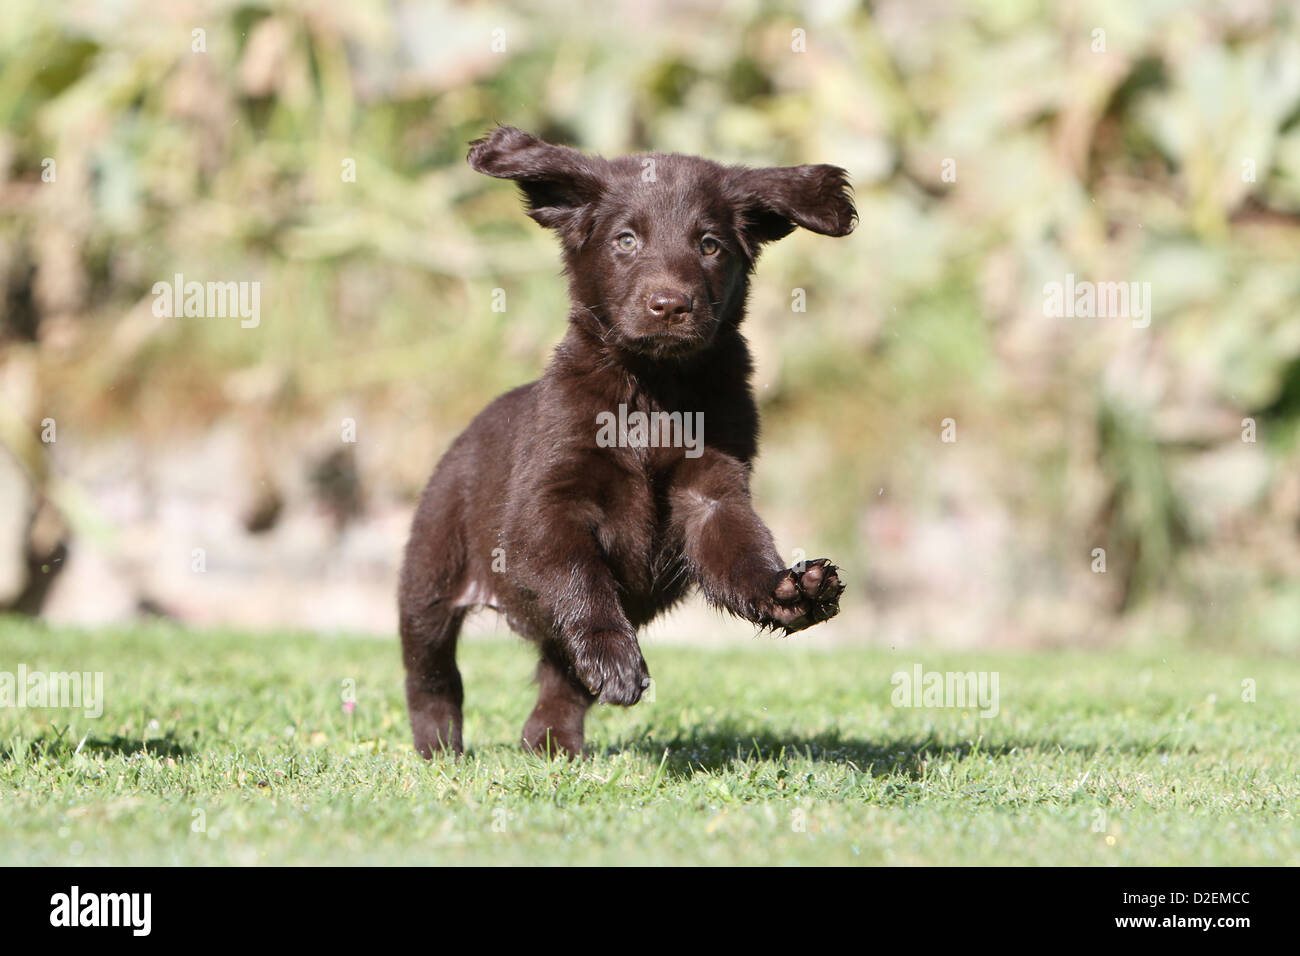 Dog Flat Coated Retriever Brown Puppy Running In A Garden Stock Photo Alamy